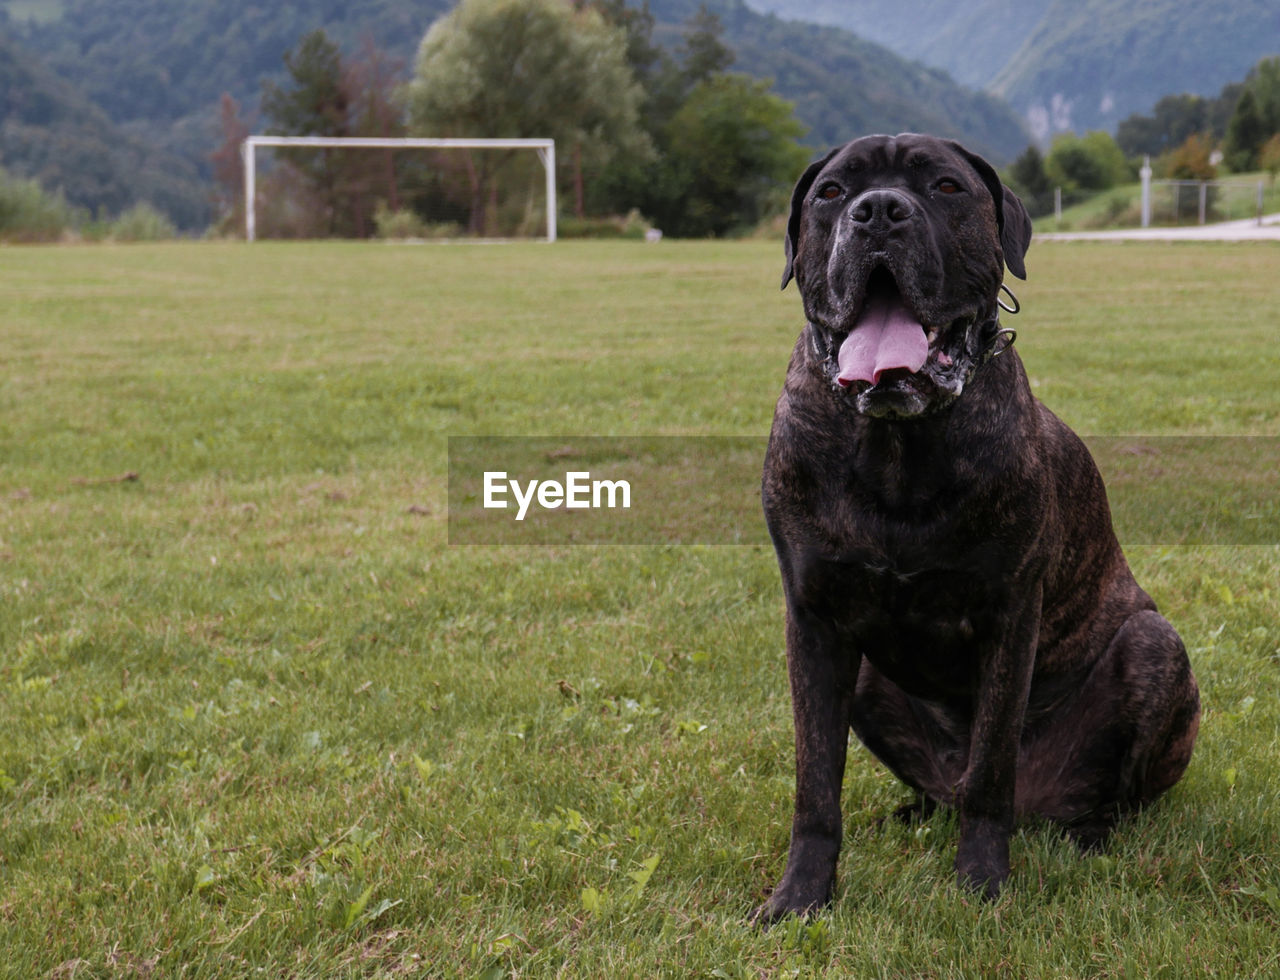 Cane corso sitting on field